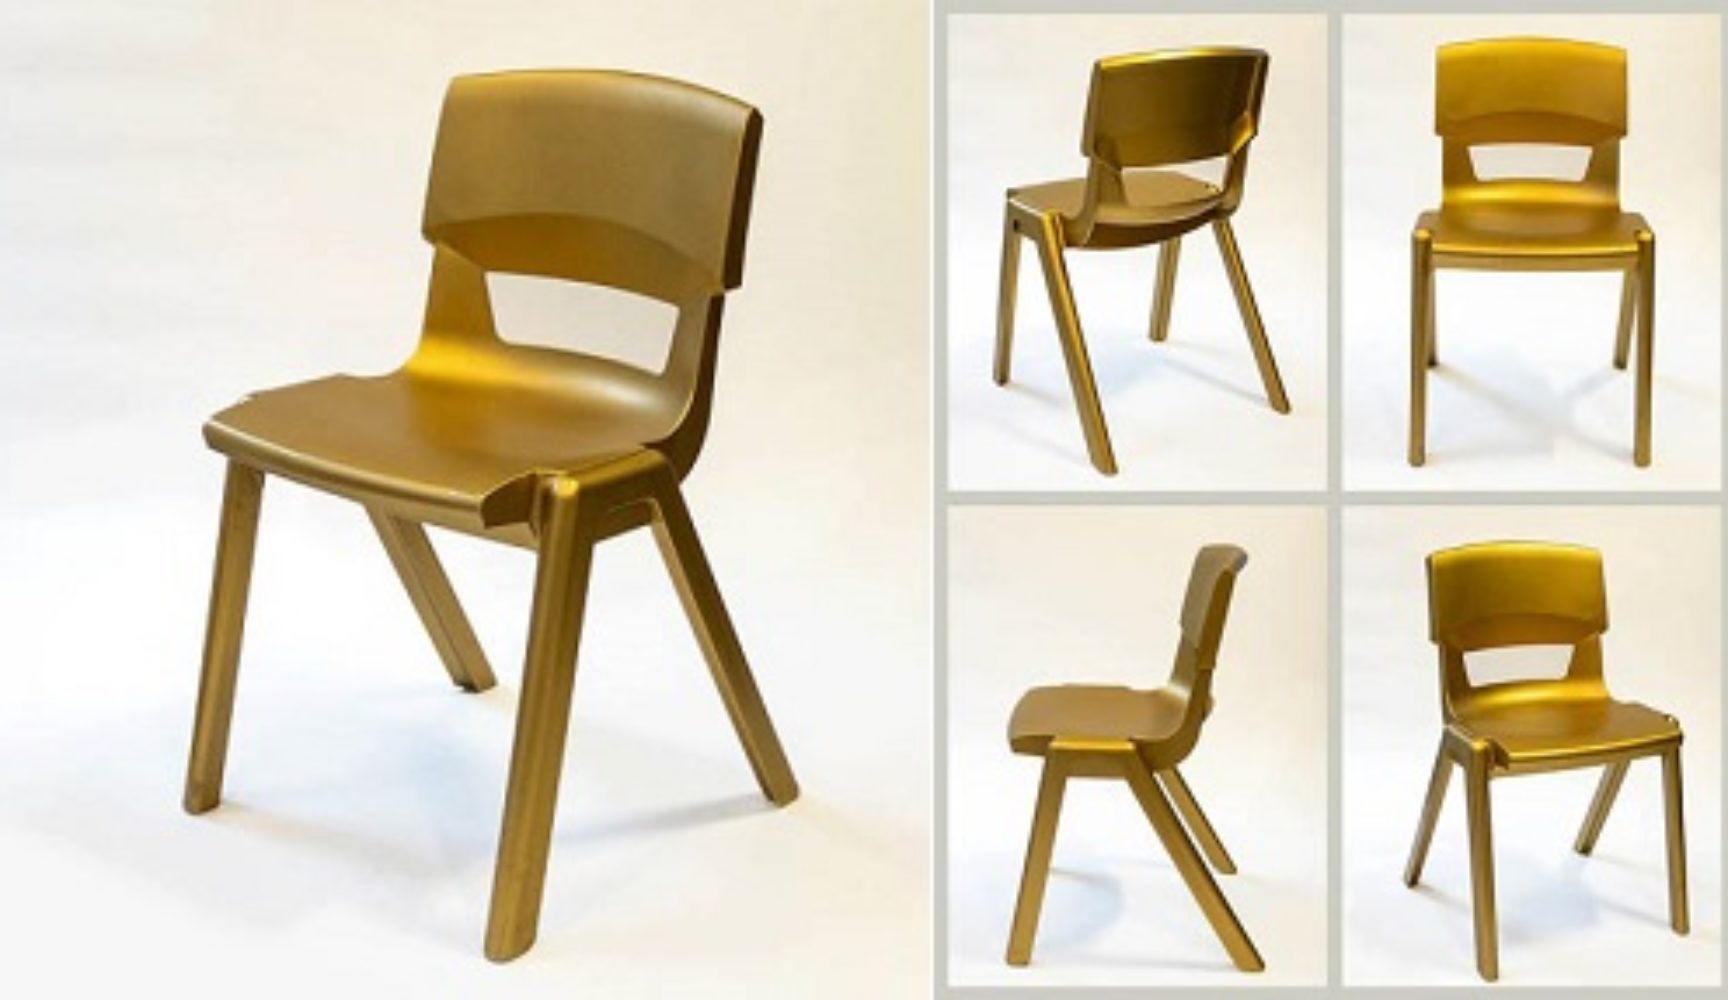 Five gold chairs